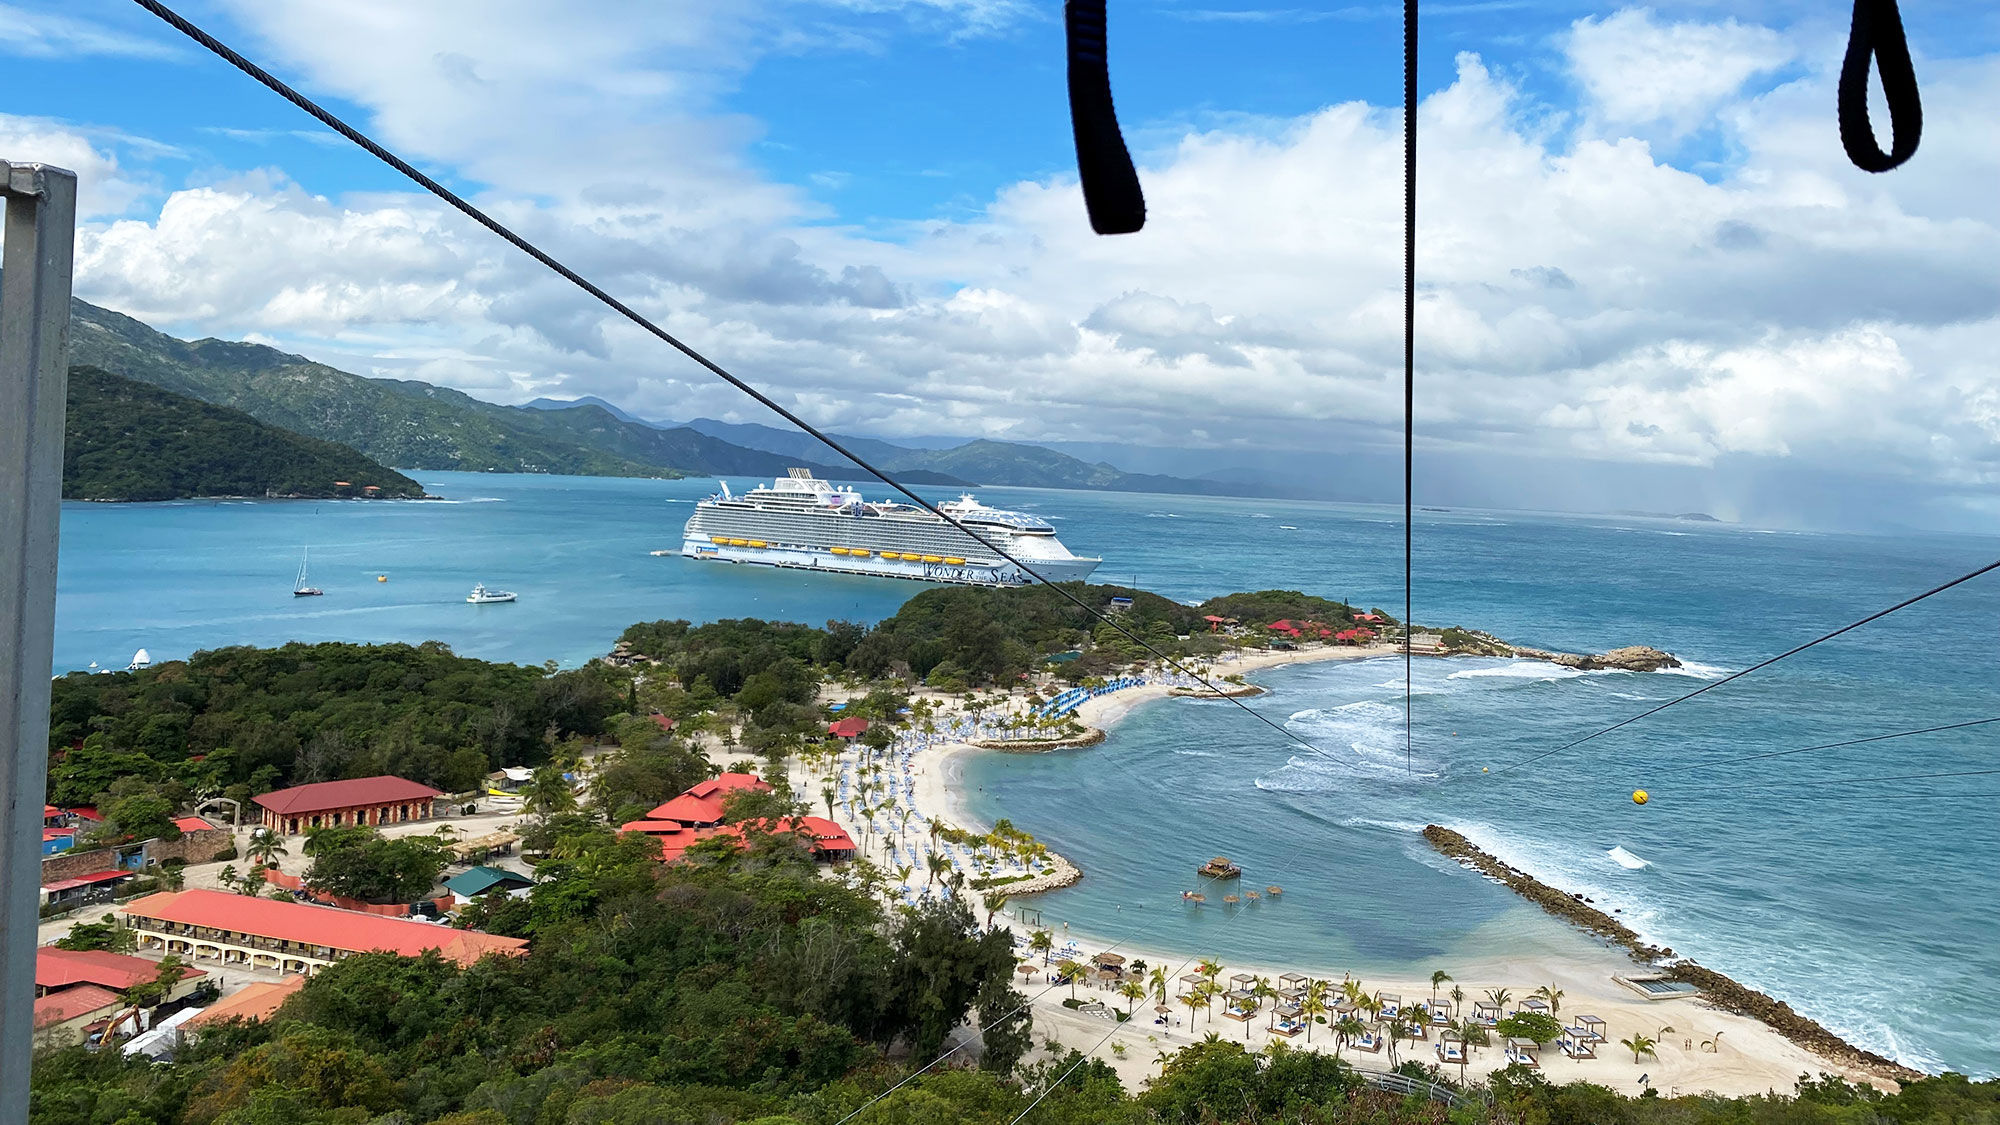 The author prepares to ride the zipline at Labadee.